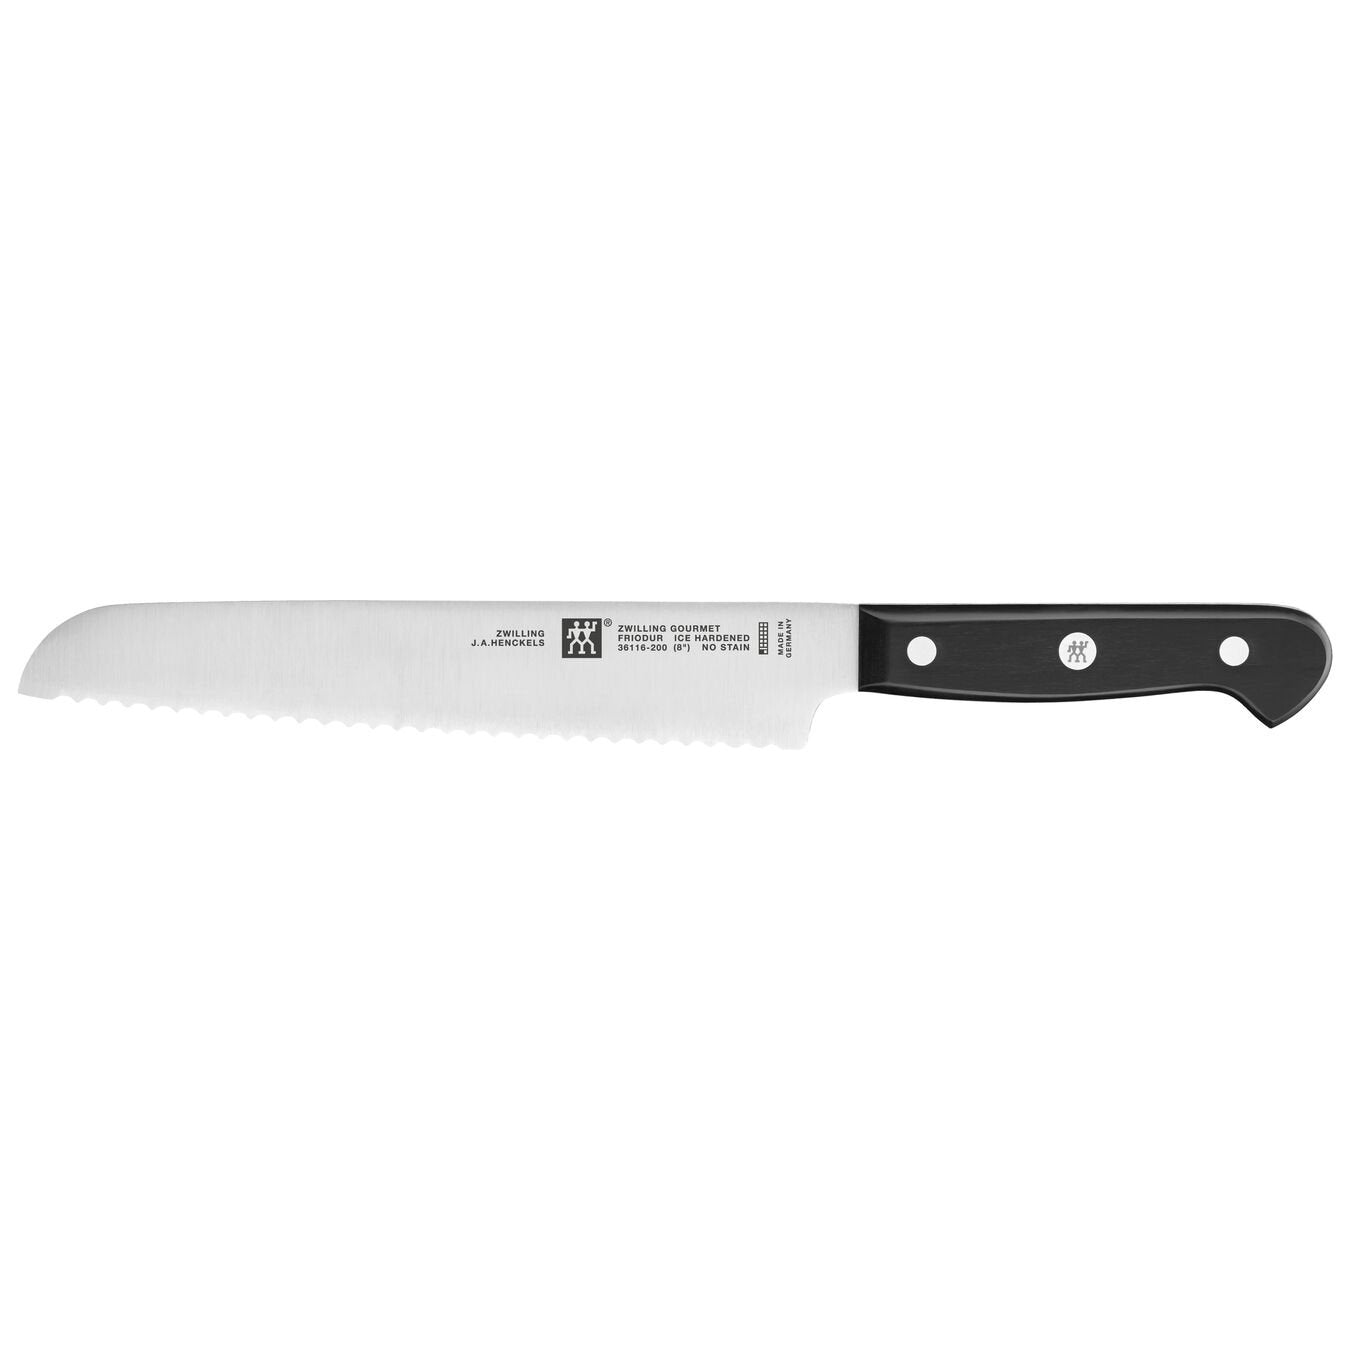 the gourmet 8 inch bread knife with serrated edge and black riveted handle on a white background